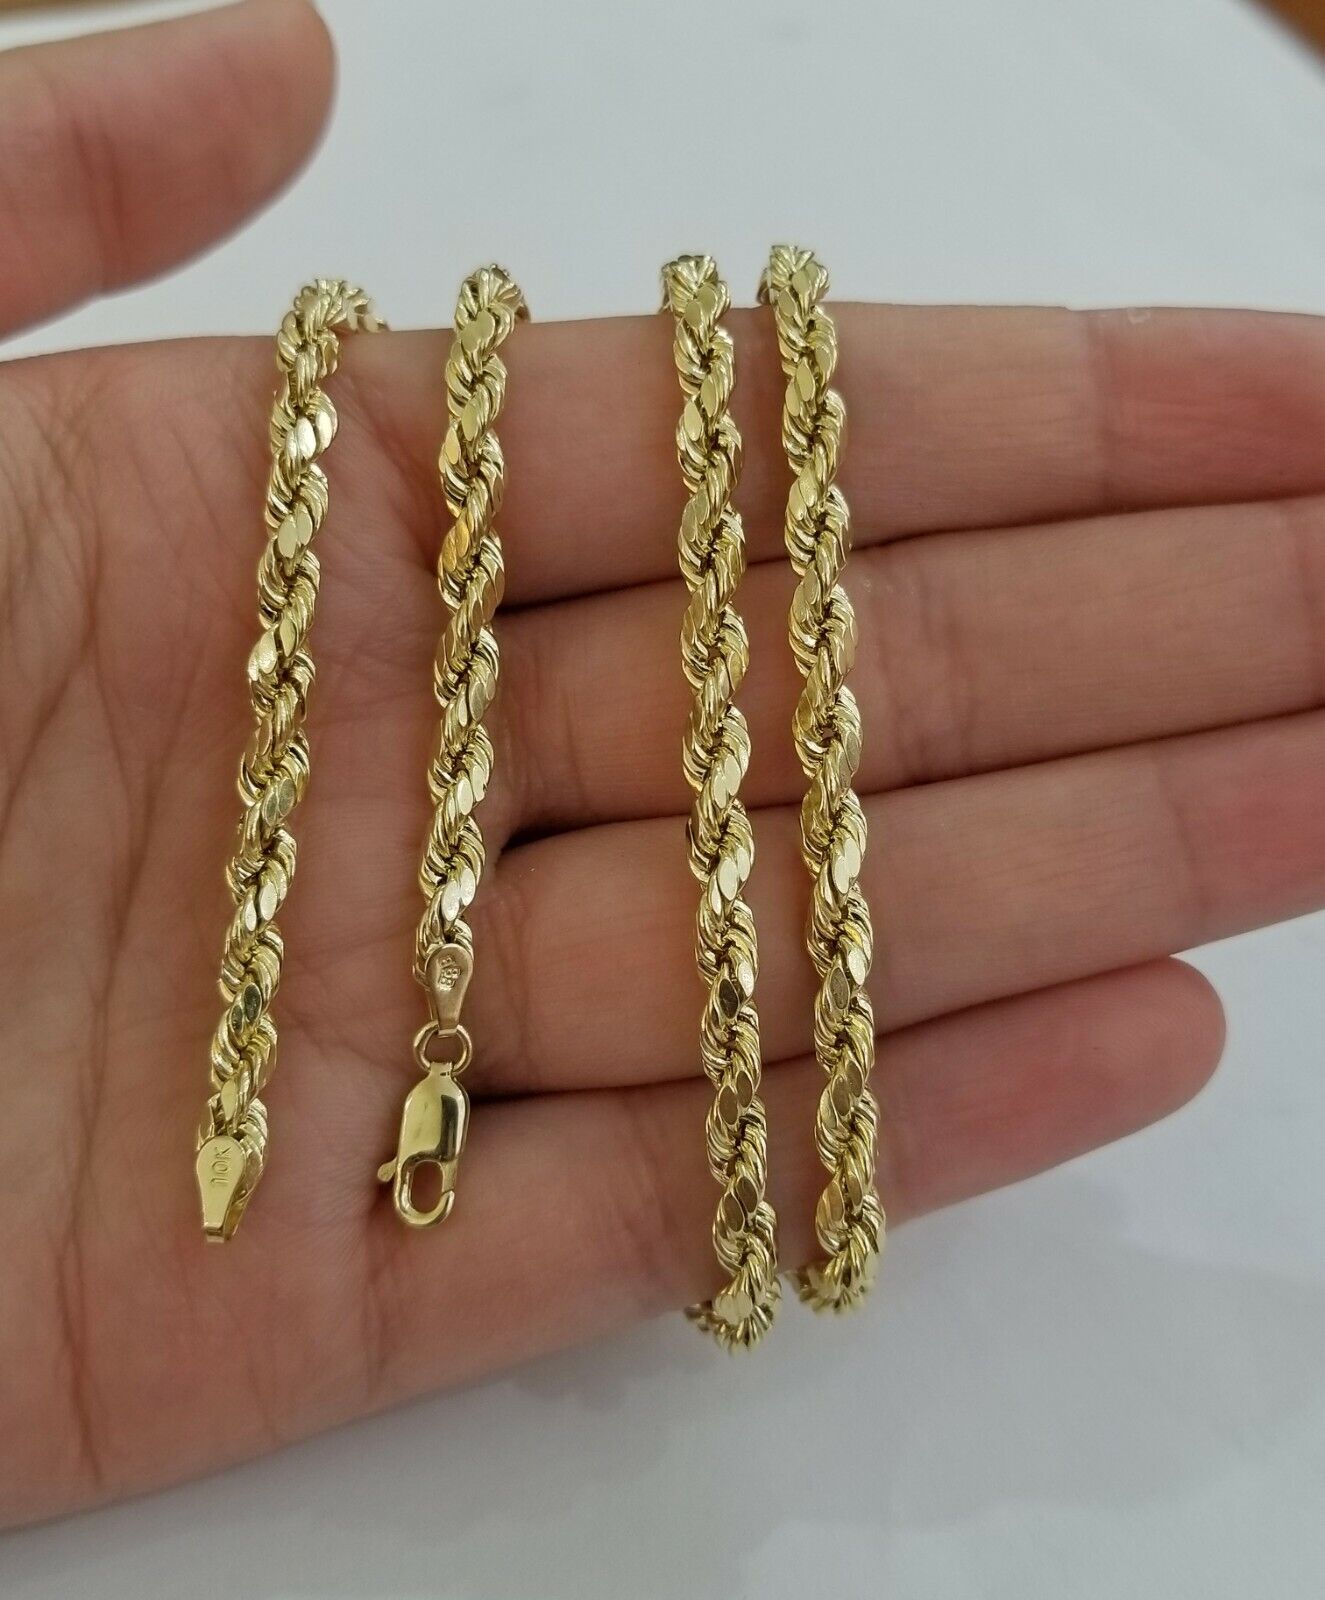 4mm 20" 10k Gold Rope Chain Necklace Diamond Cut REAL 10kt Yellow Gold Men Women